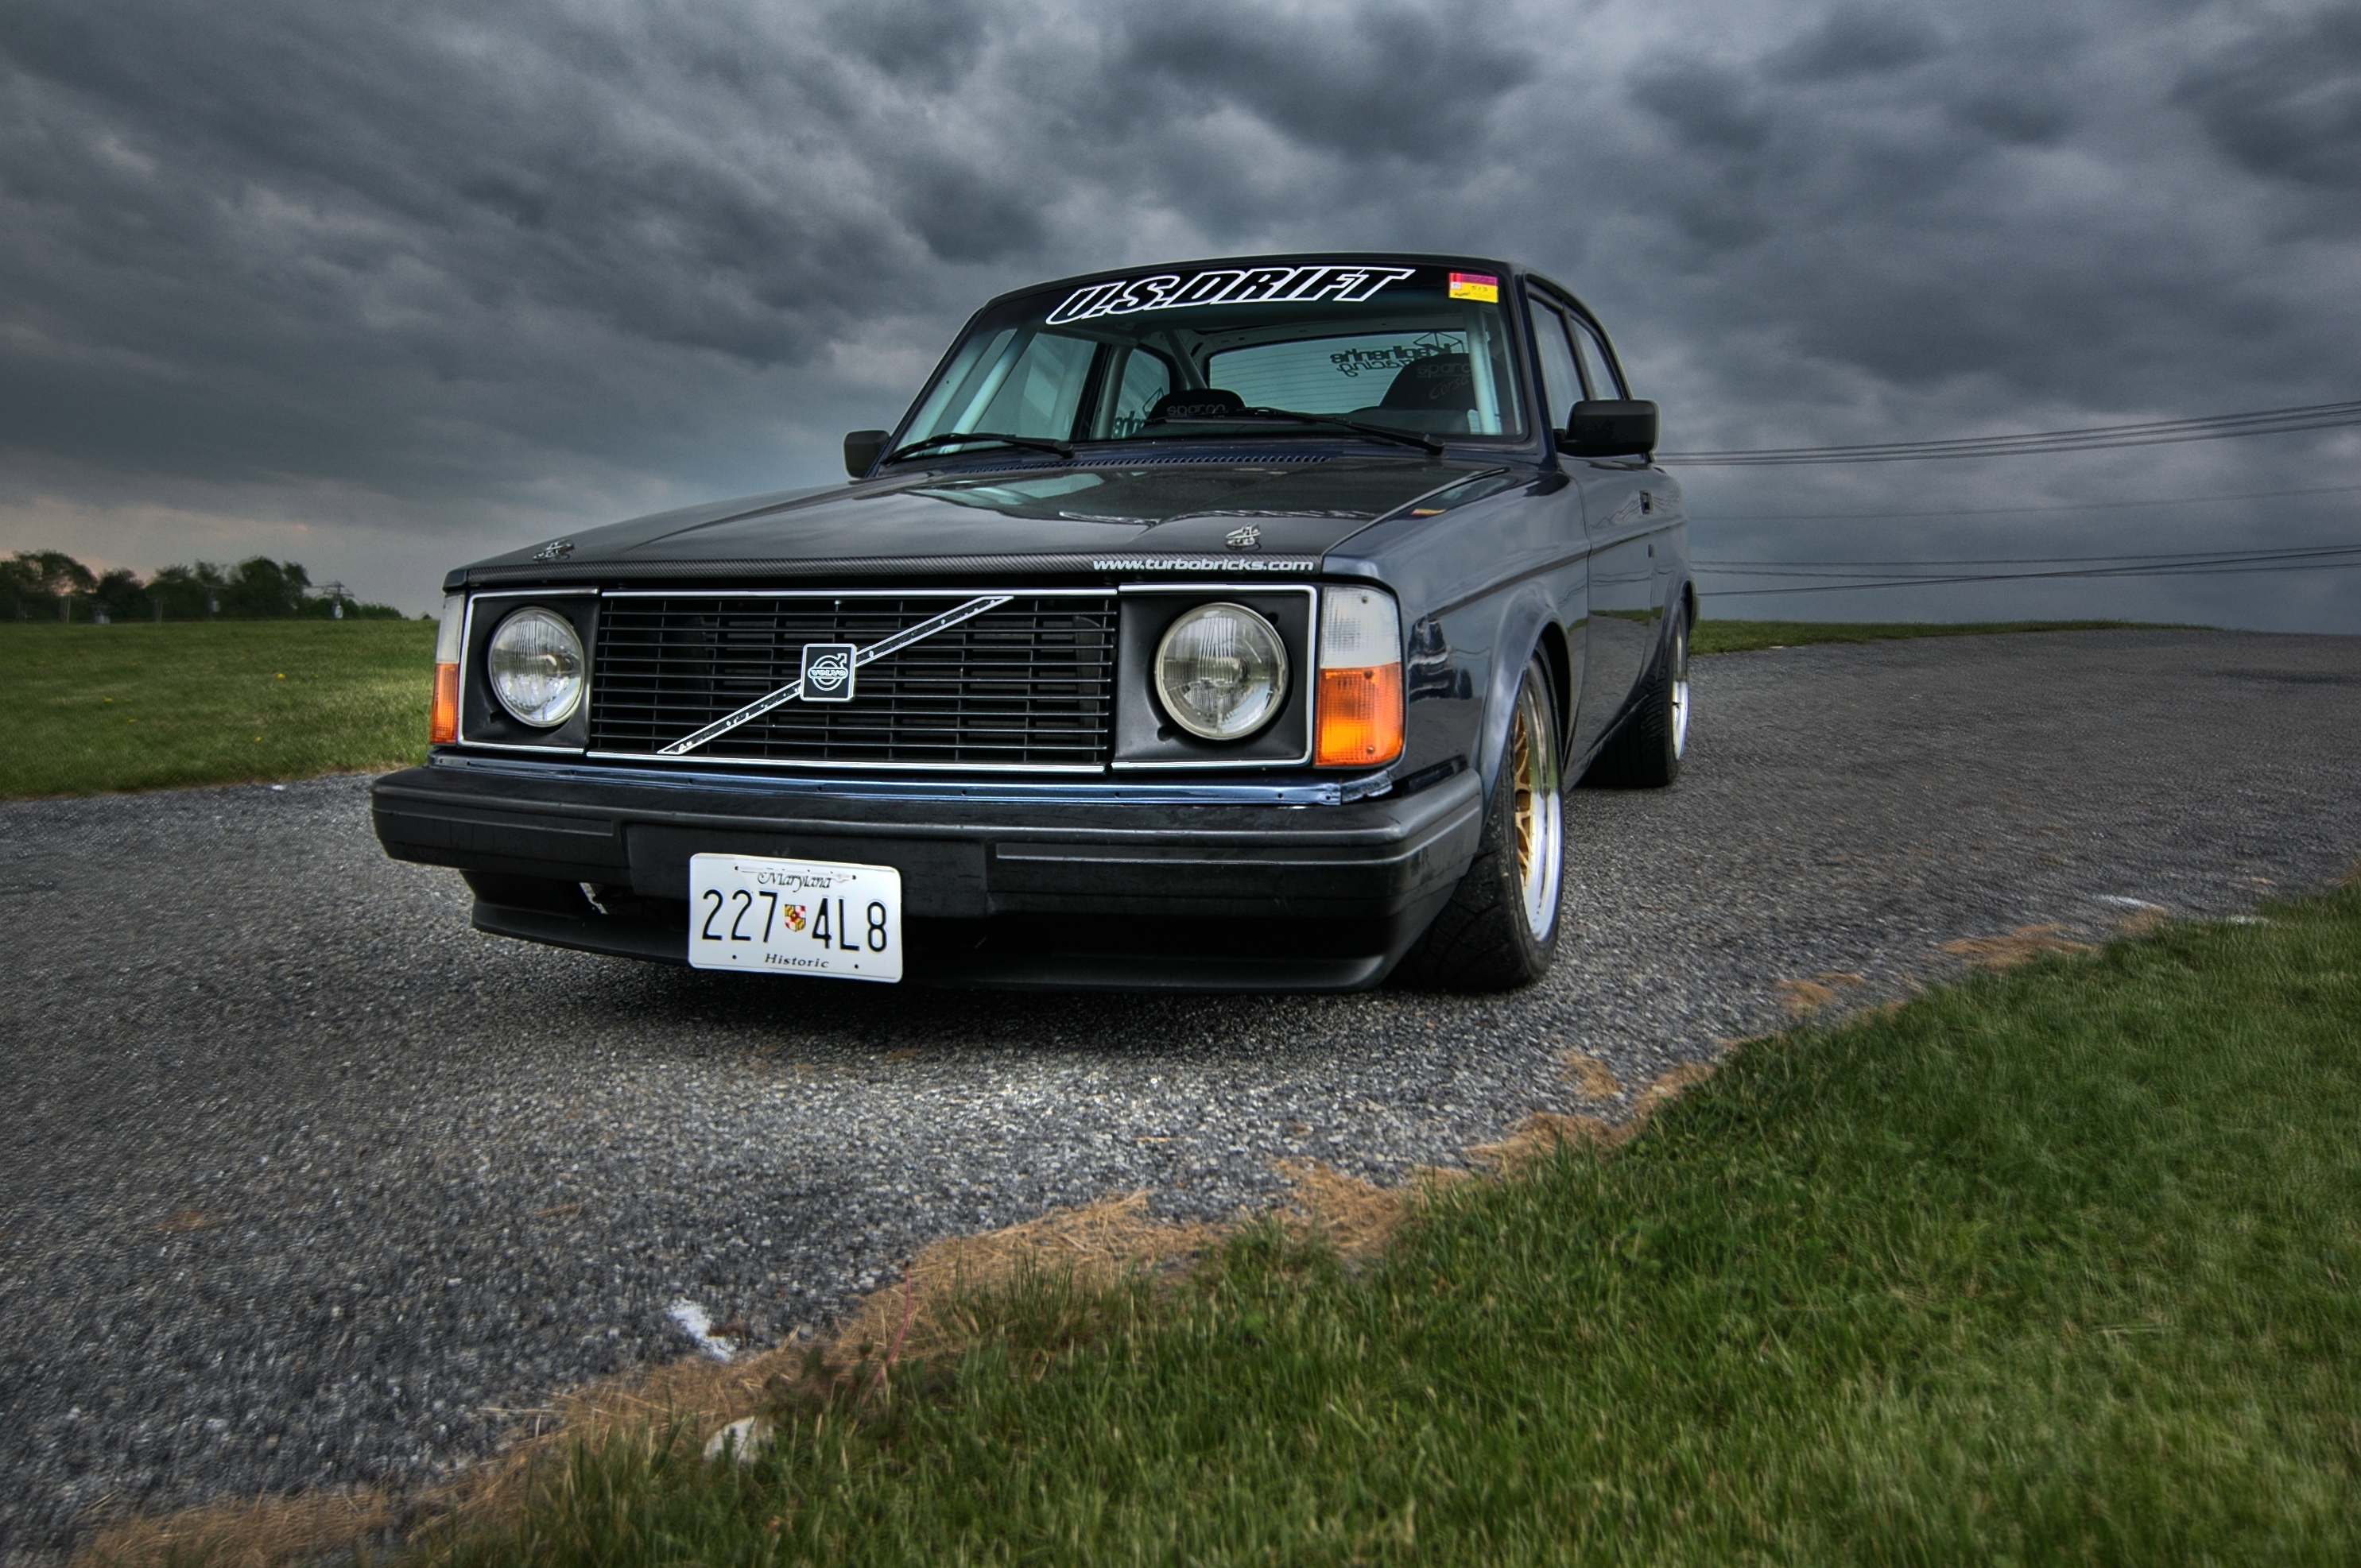 On this page we present you the most successful photo gallery of Volvo 242